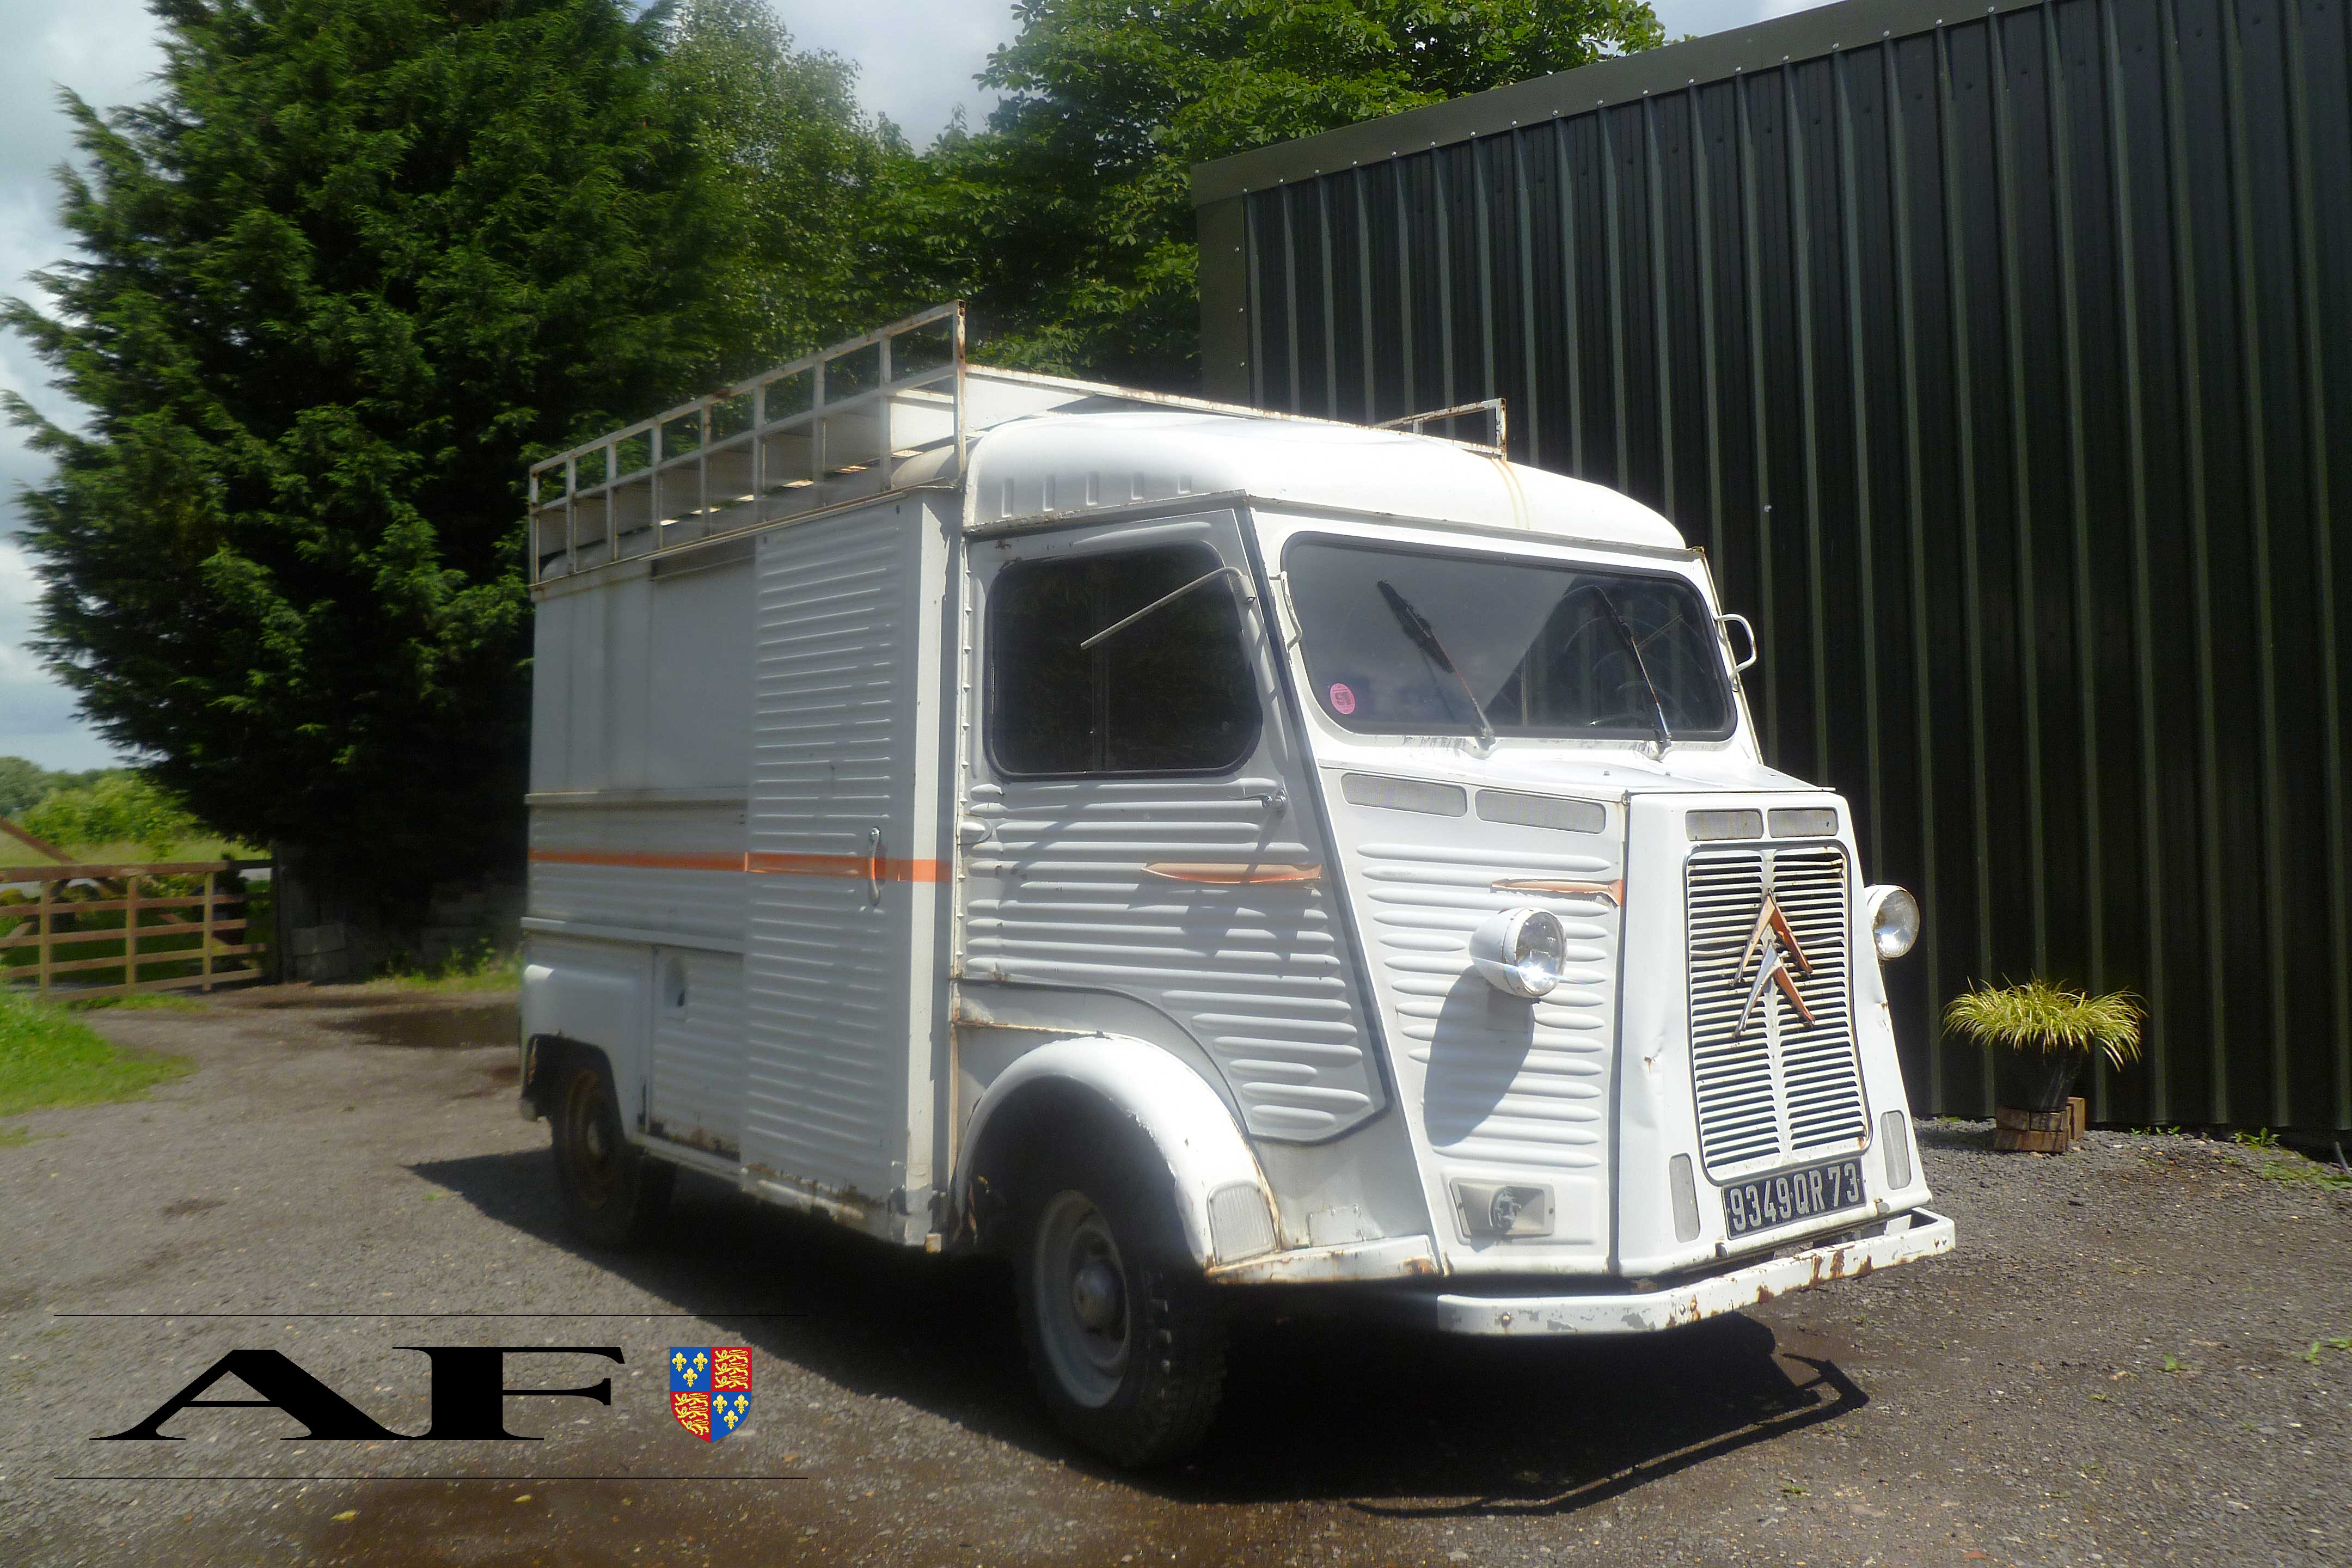 Citroen HY Online : Citroen H, HY vans for Sale and Wanted